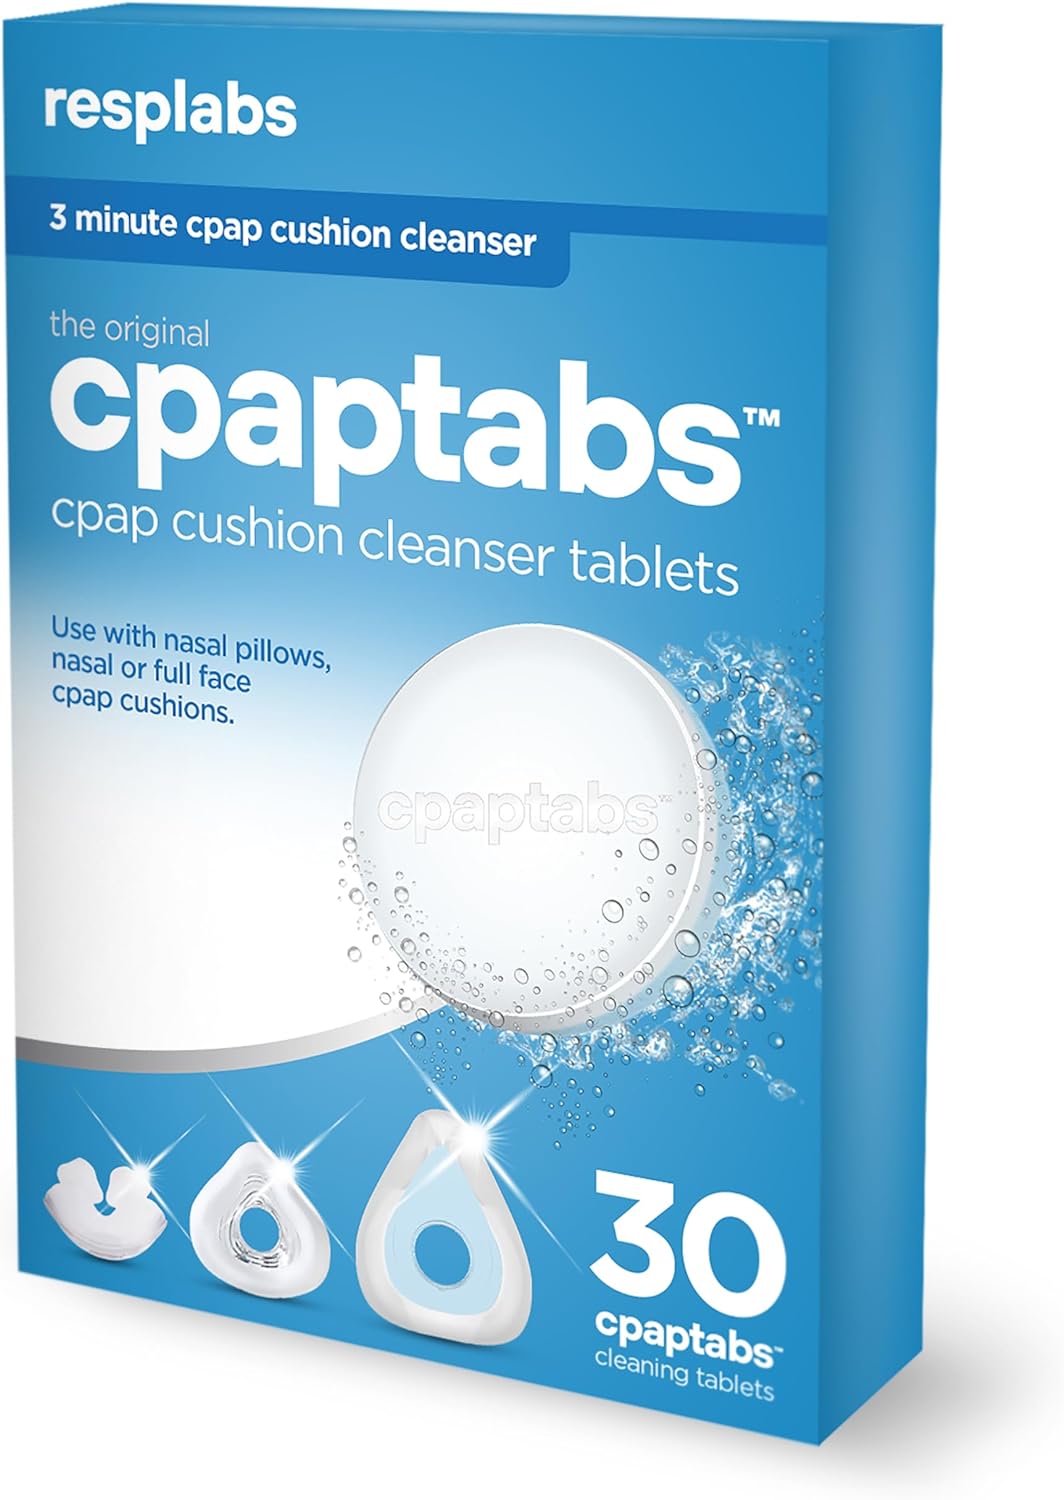 resplabs CPAP Mask Cushion Cleaner Tablets, cpaptabs - resplabs